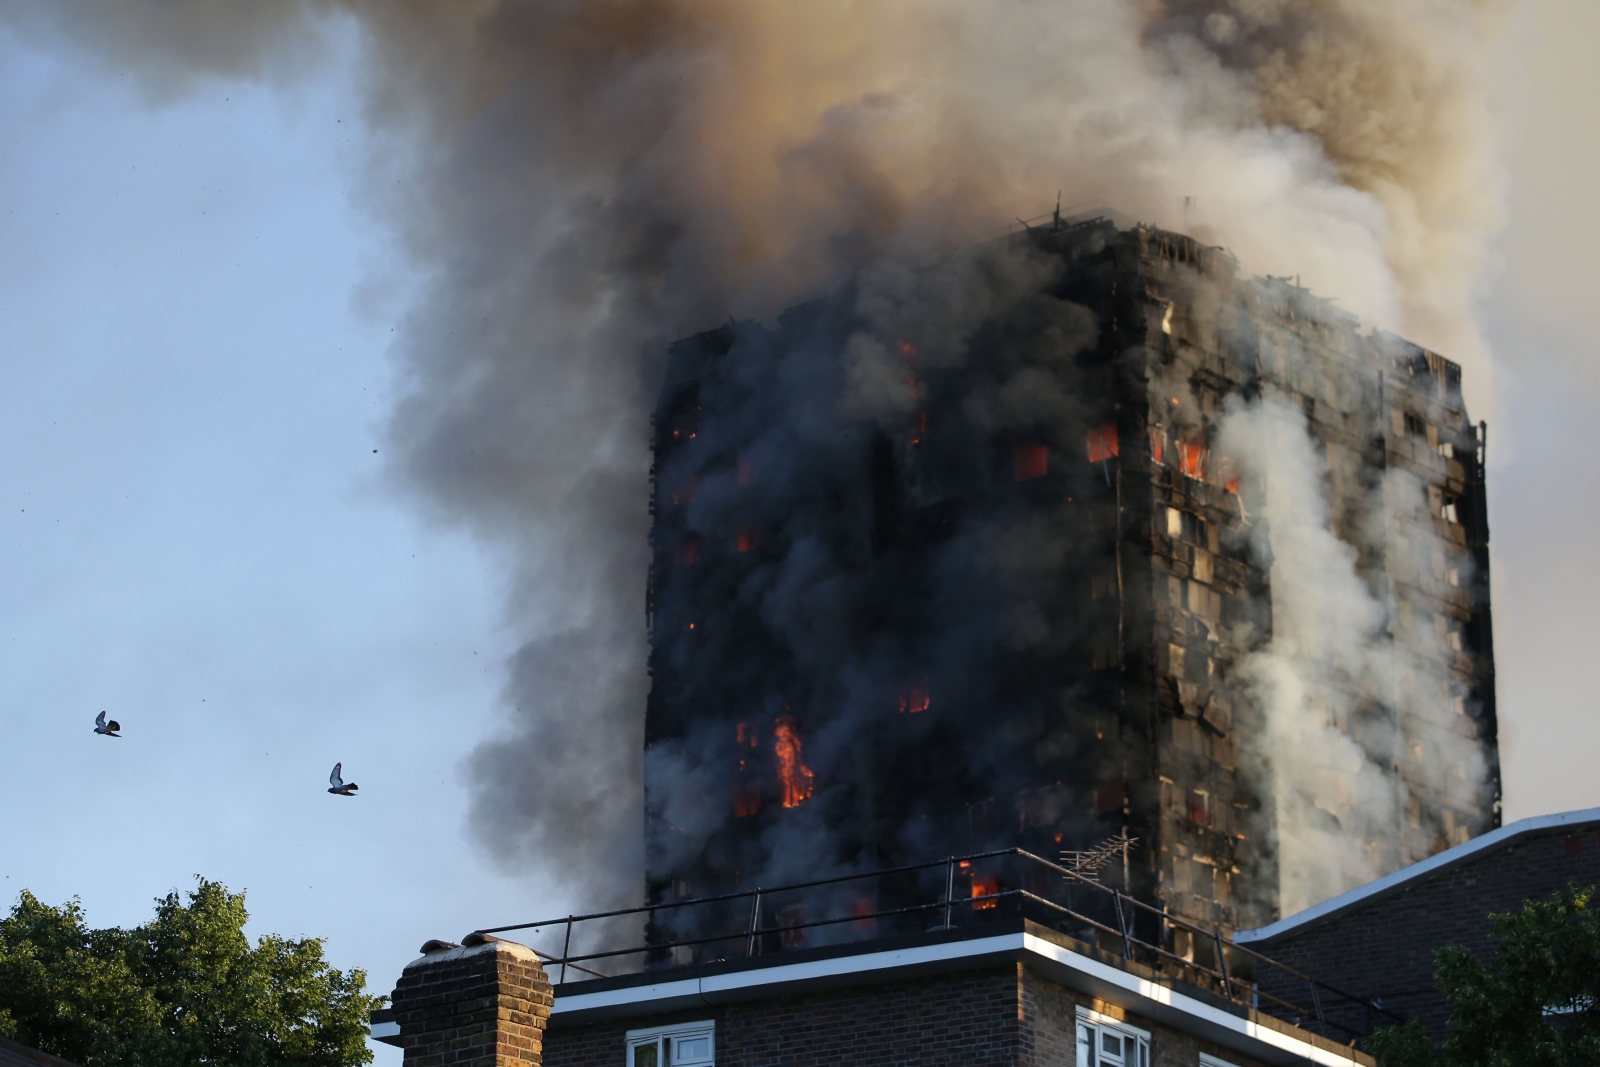 The London Tower Blaze Exposes a Divided Britain